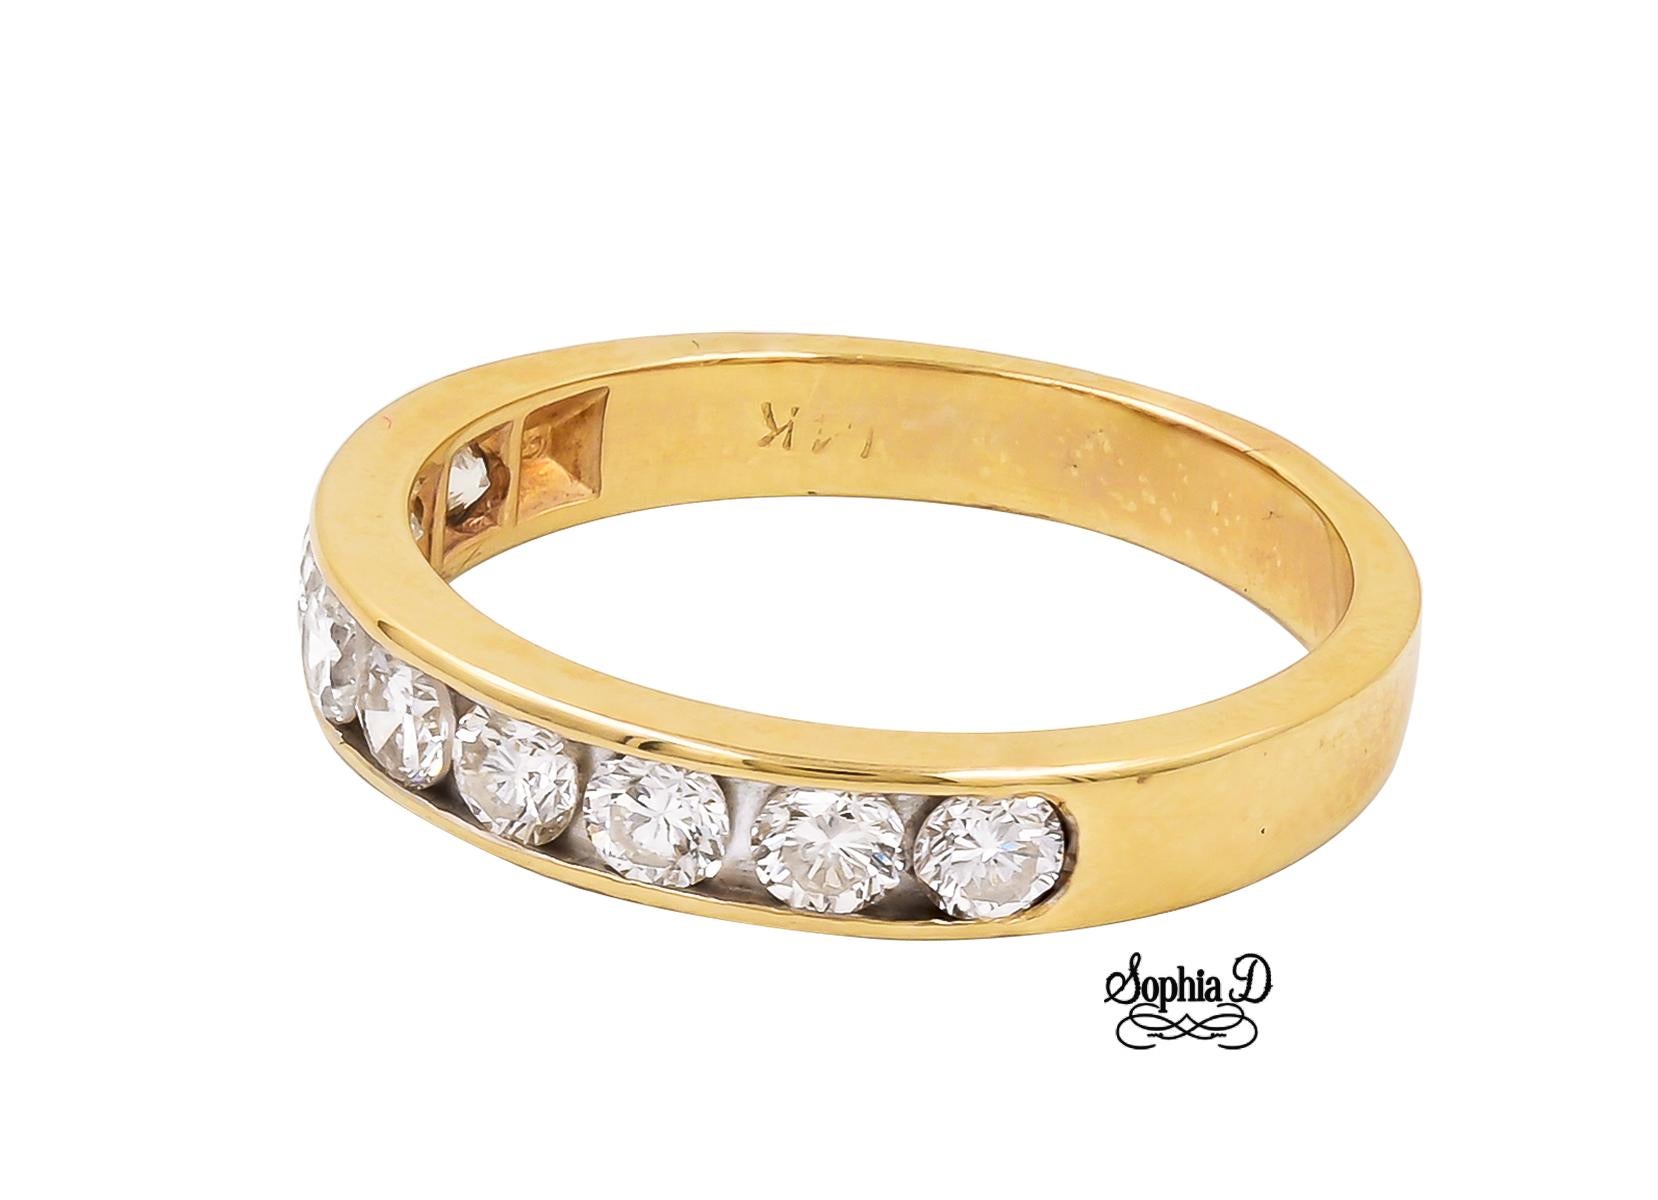 14K yellow gold ring with 9 small round diamonds.

Sophia D by Joseph Dardashti LTD has been known worldwide for 35 years and are inspired by classic Art Deco design that merges with modern manufacturing techniques.  